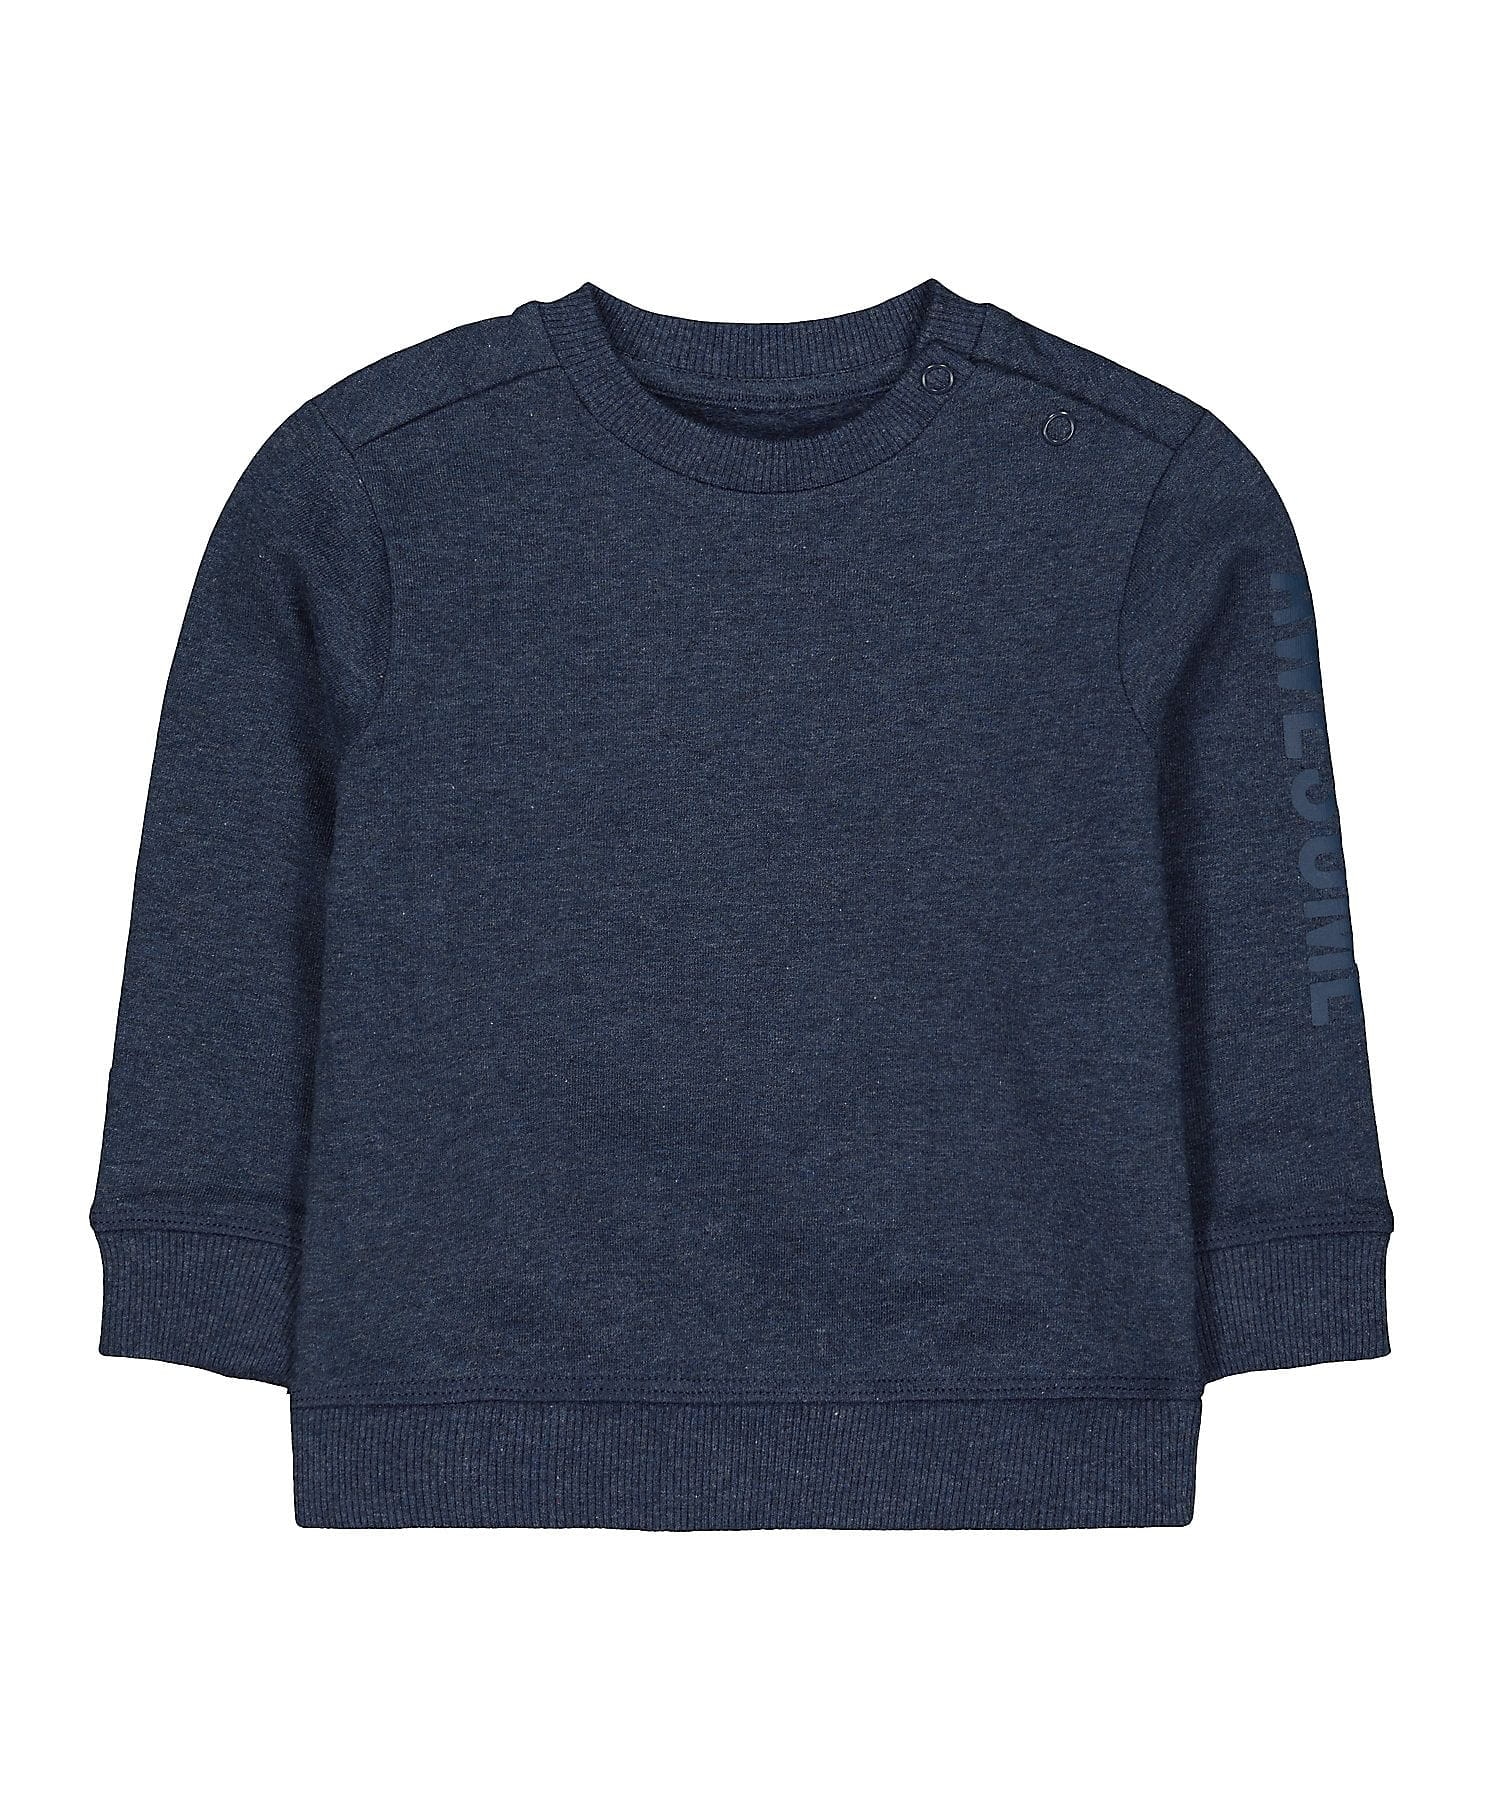 Mothercare | Navy Awesome Sweat Top 0